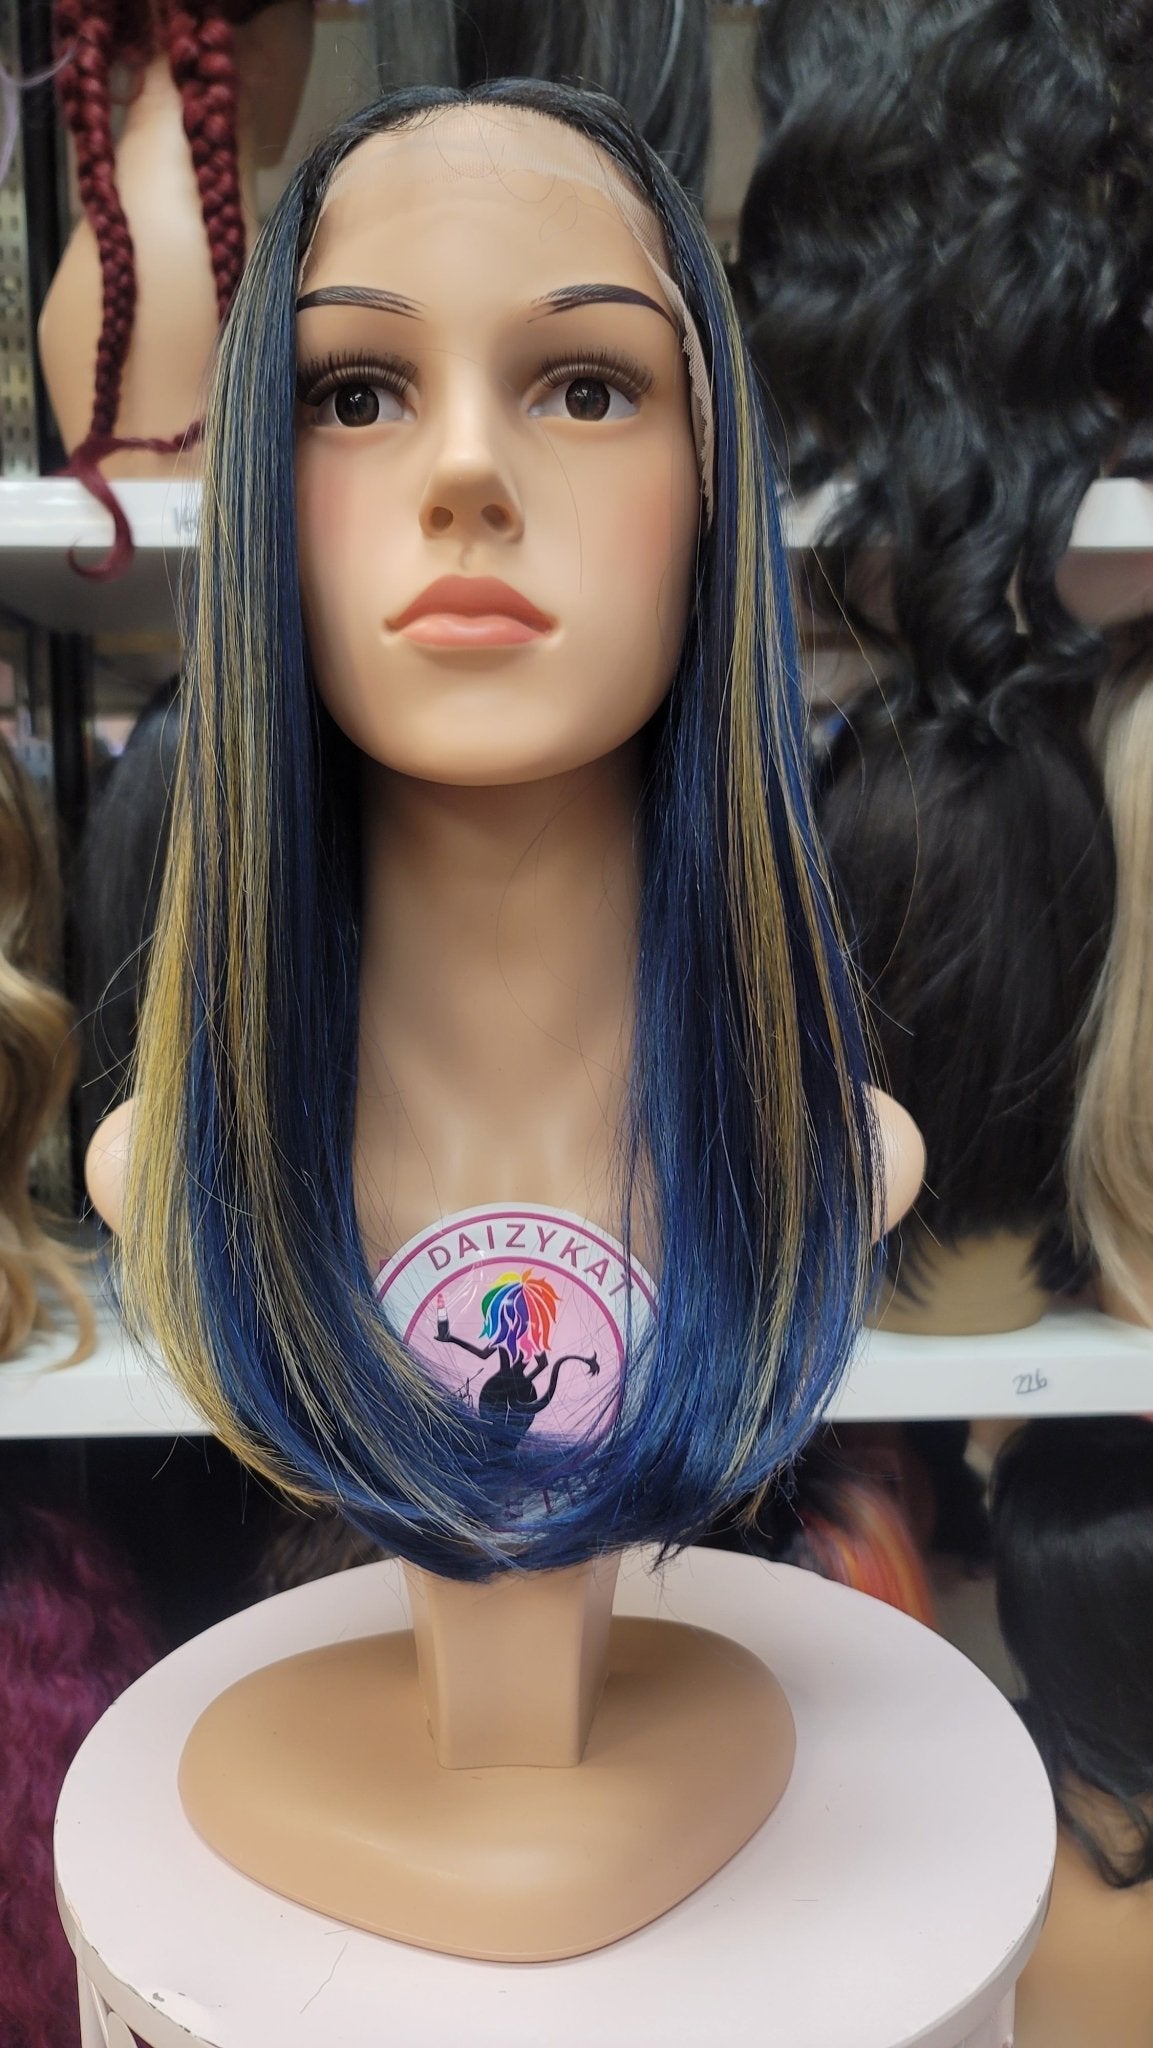 412 JANE - Middle Part Lace Front Wig - BLU/GLD - DaizyKat Cosmetics 412 JANE - Middle Part Lace Front Wig - BLU/GLD DaizyKat Cosmetics Wigs